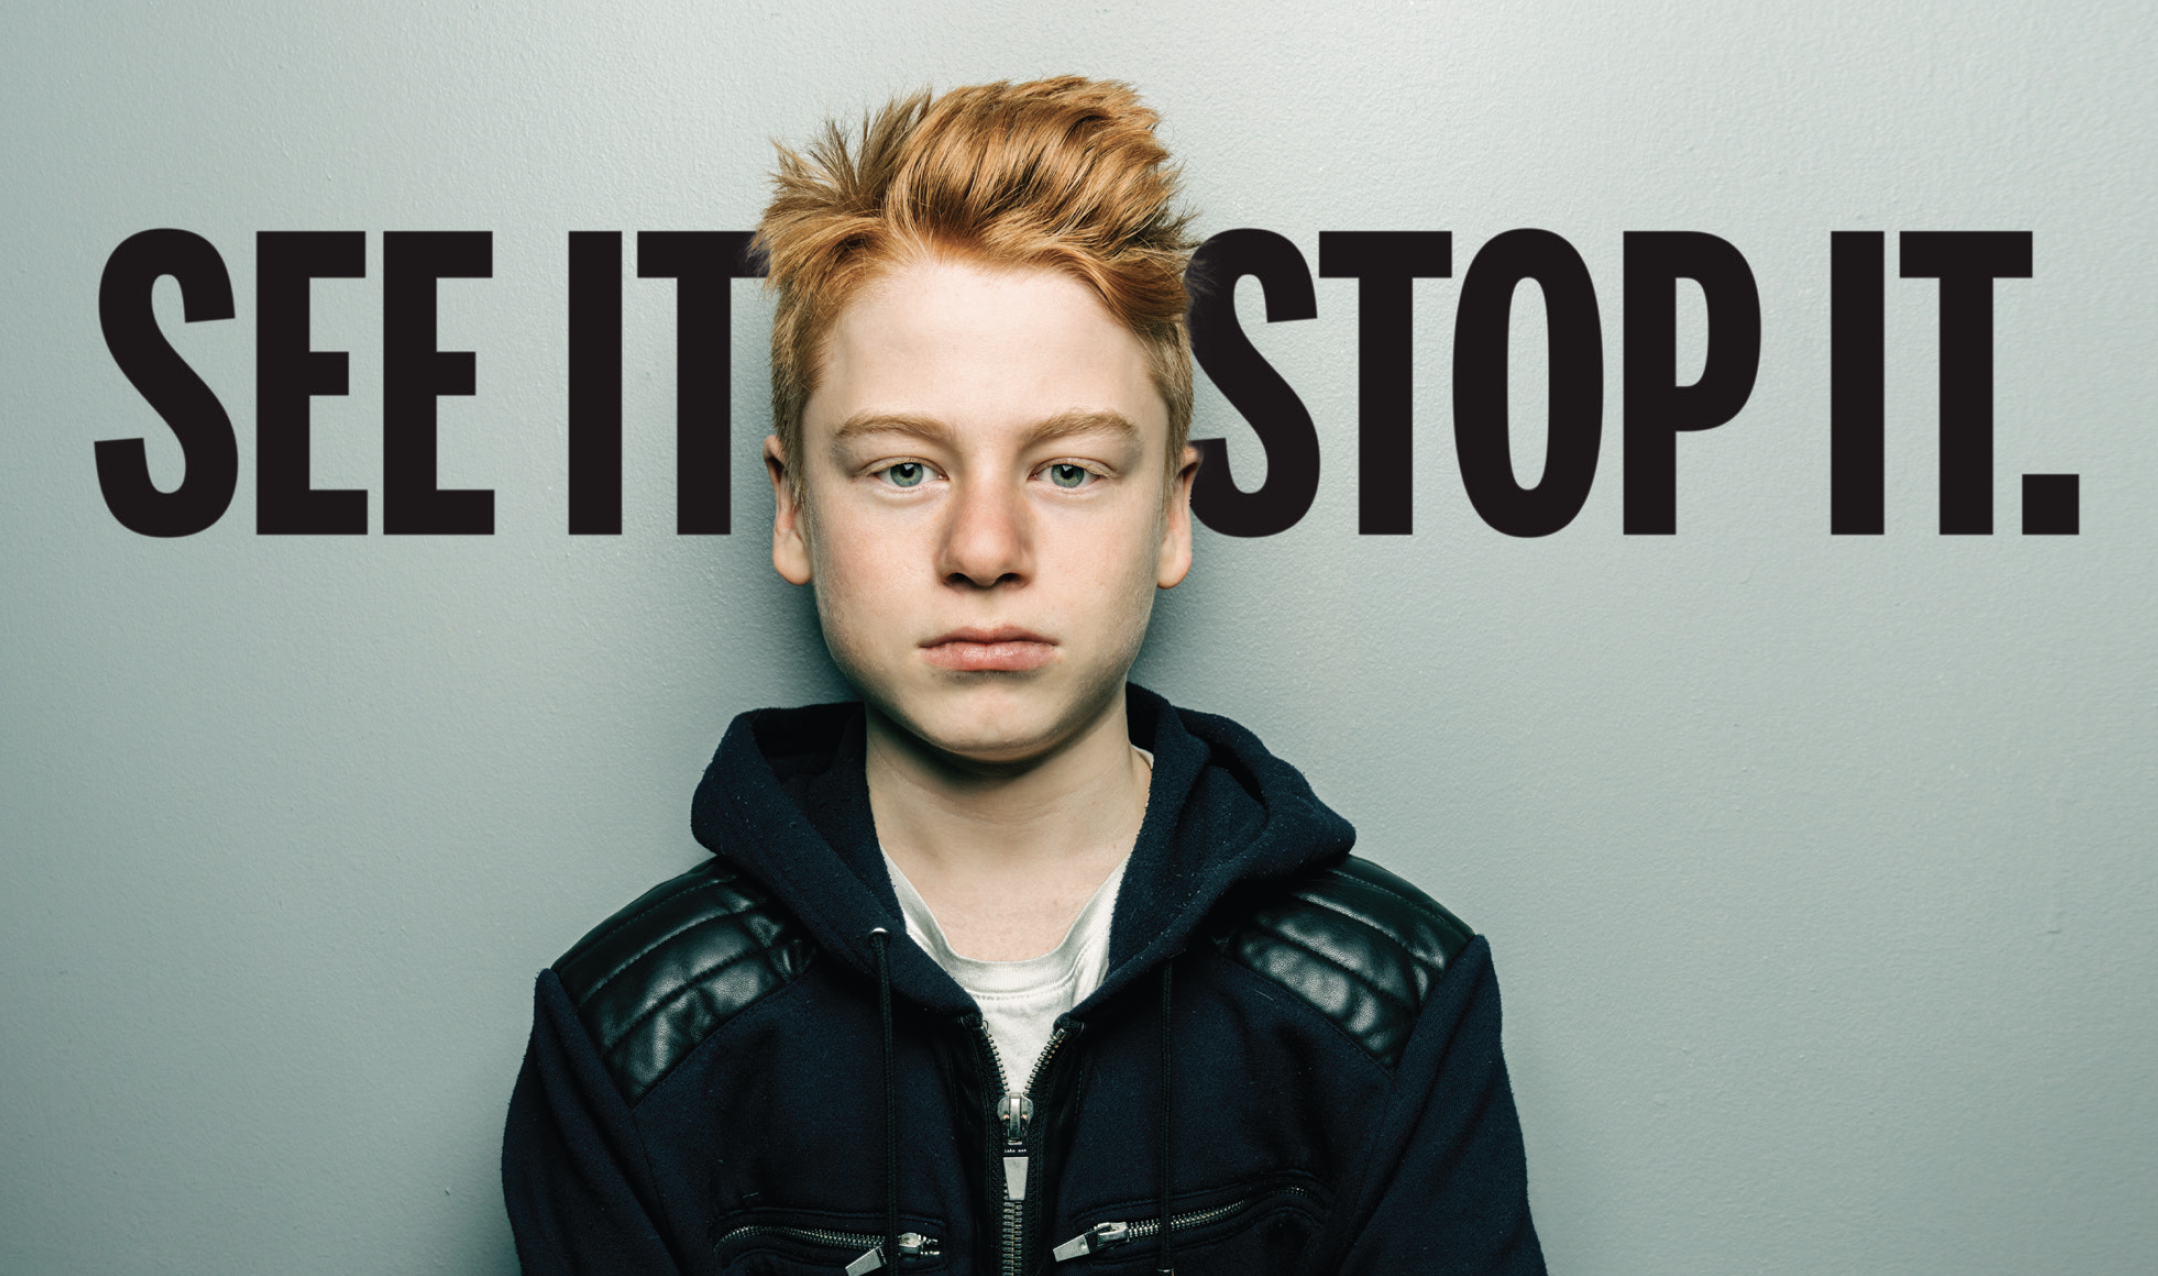 Red-haired boy standing in front of the words, "SEE IT, STOP IT."